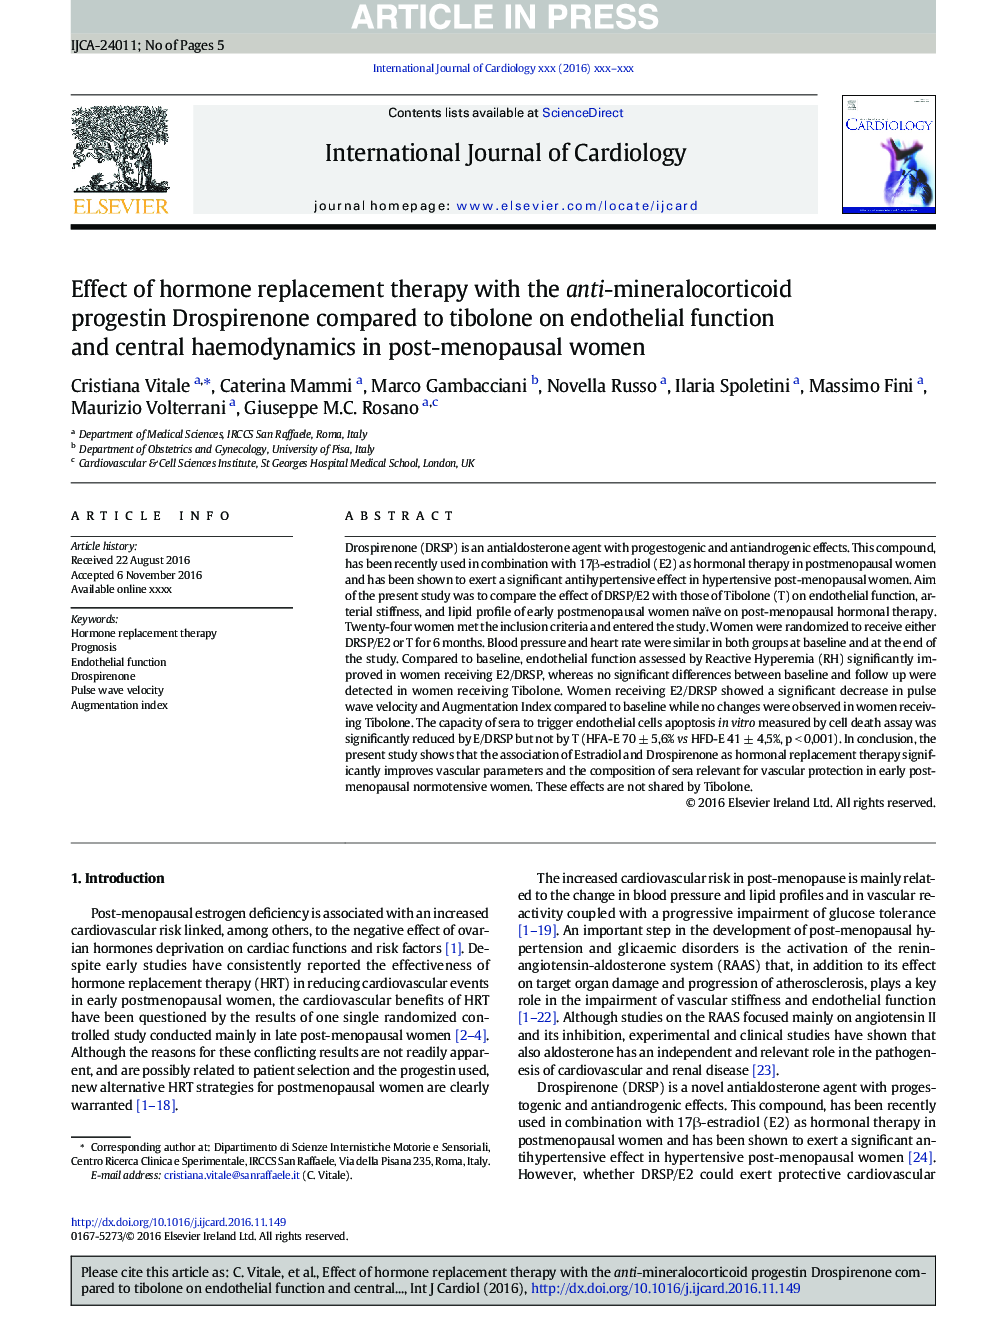 Effect of hormone replacement therapy with the anti-mineralocorticoid progestin Drospirenone compared to tibolone on endothelial function and central haemodynamics in post-menopausal women